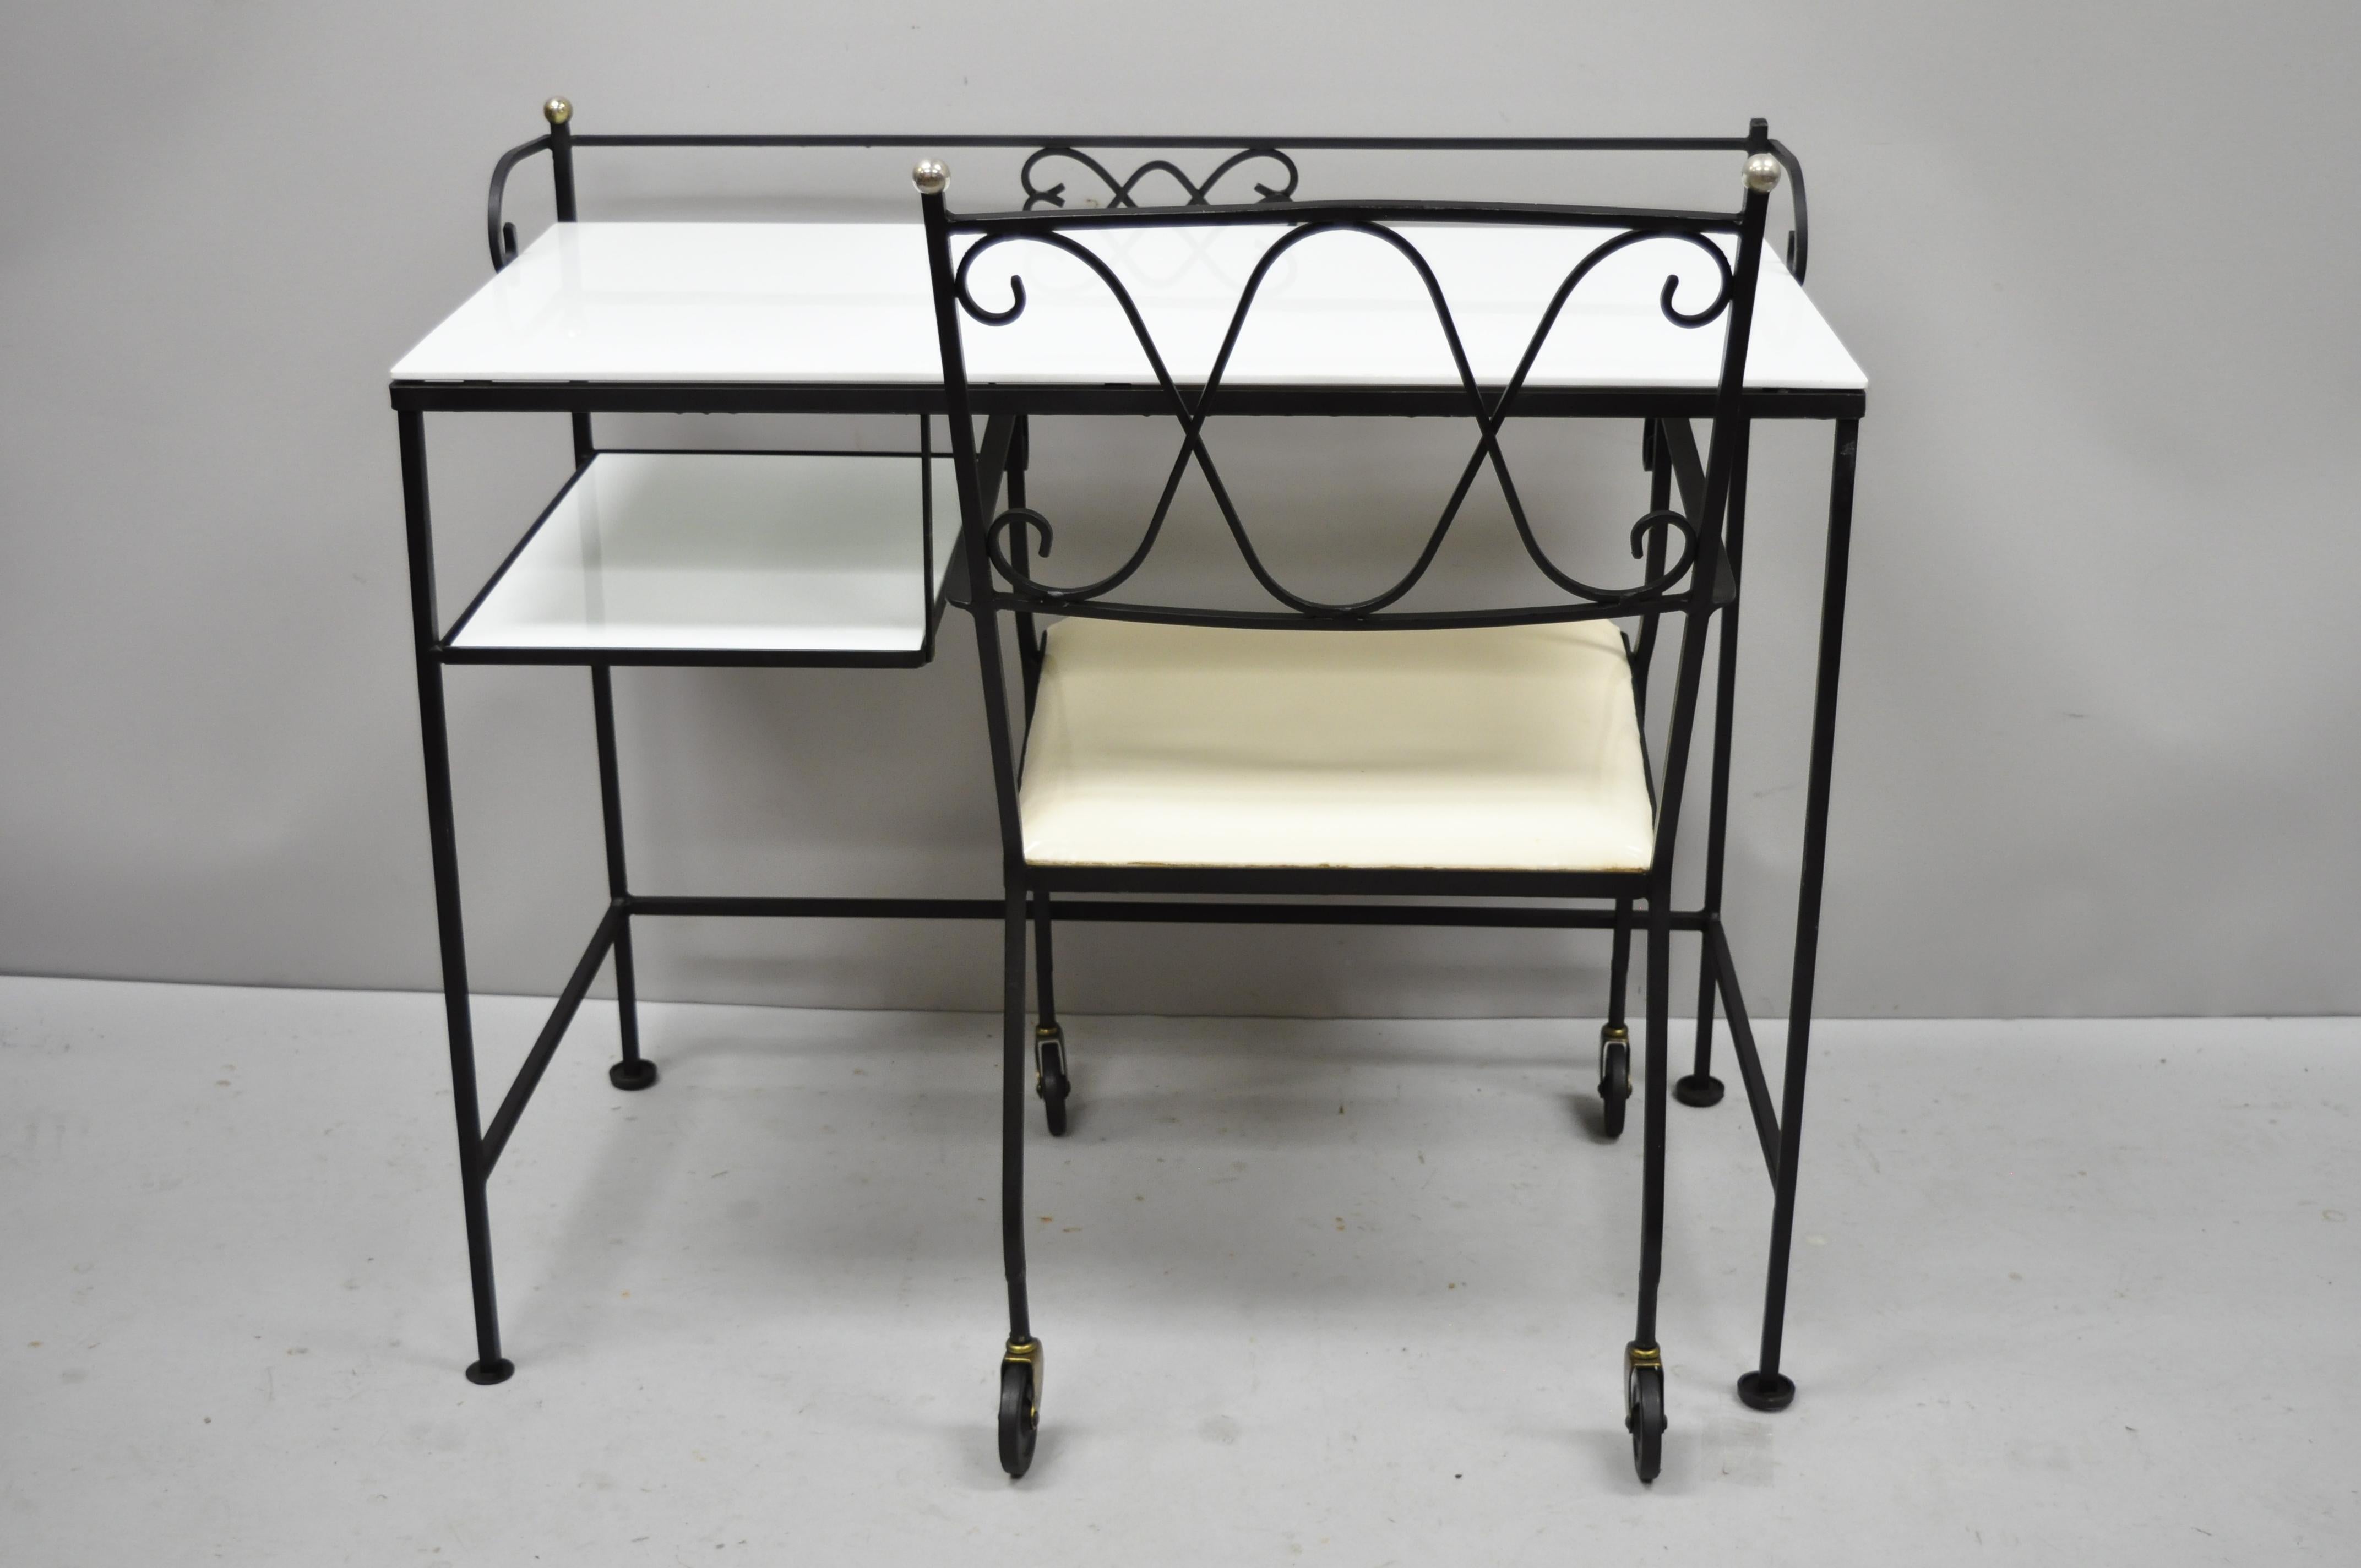 Vintage Gallo original iron works wrought iron Salterini style desk and chair with vitrolite glass. Item features wrought iron frame, white Vitrolite glass top and lower shelf, ball finials, wheels on chair, original label to chair, clean modernist